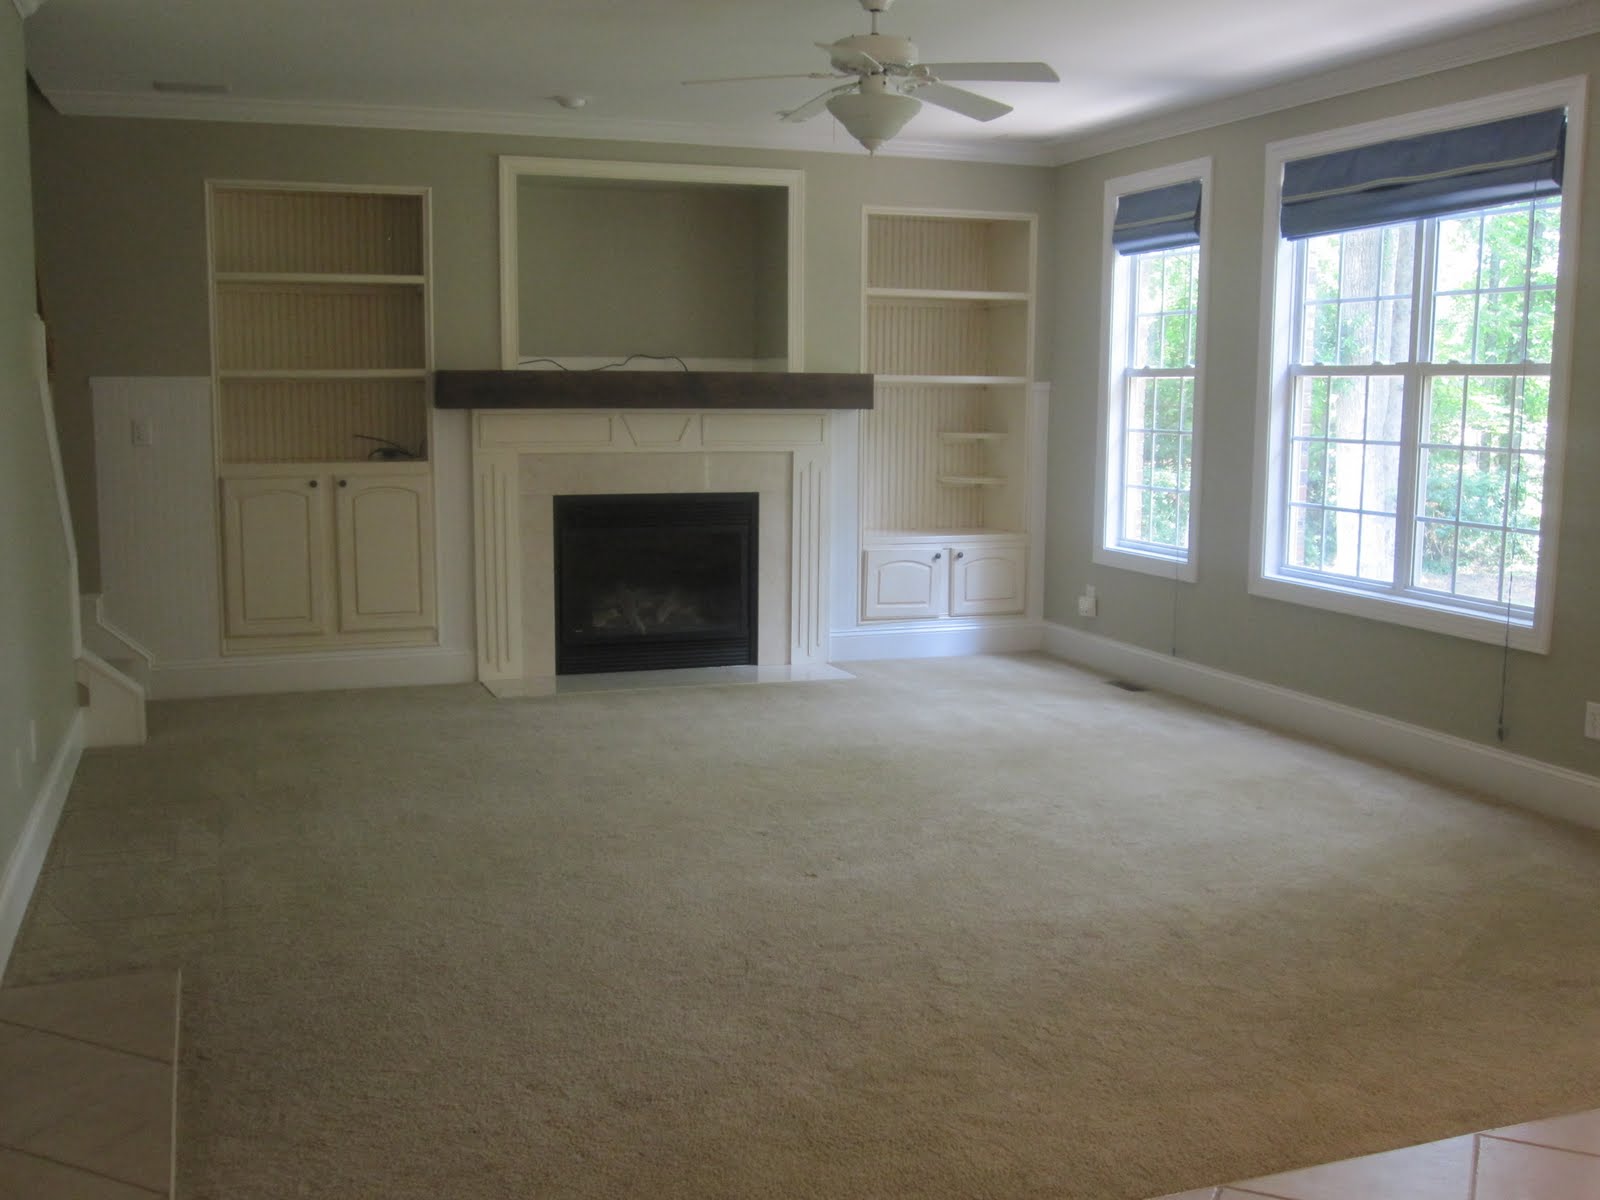 Get a Professional, Detailed Carpet Cleaning Today!